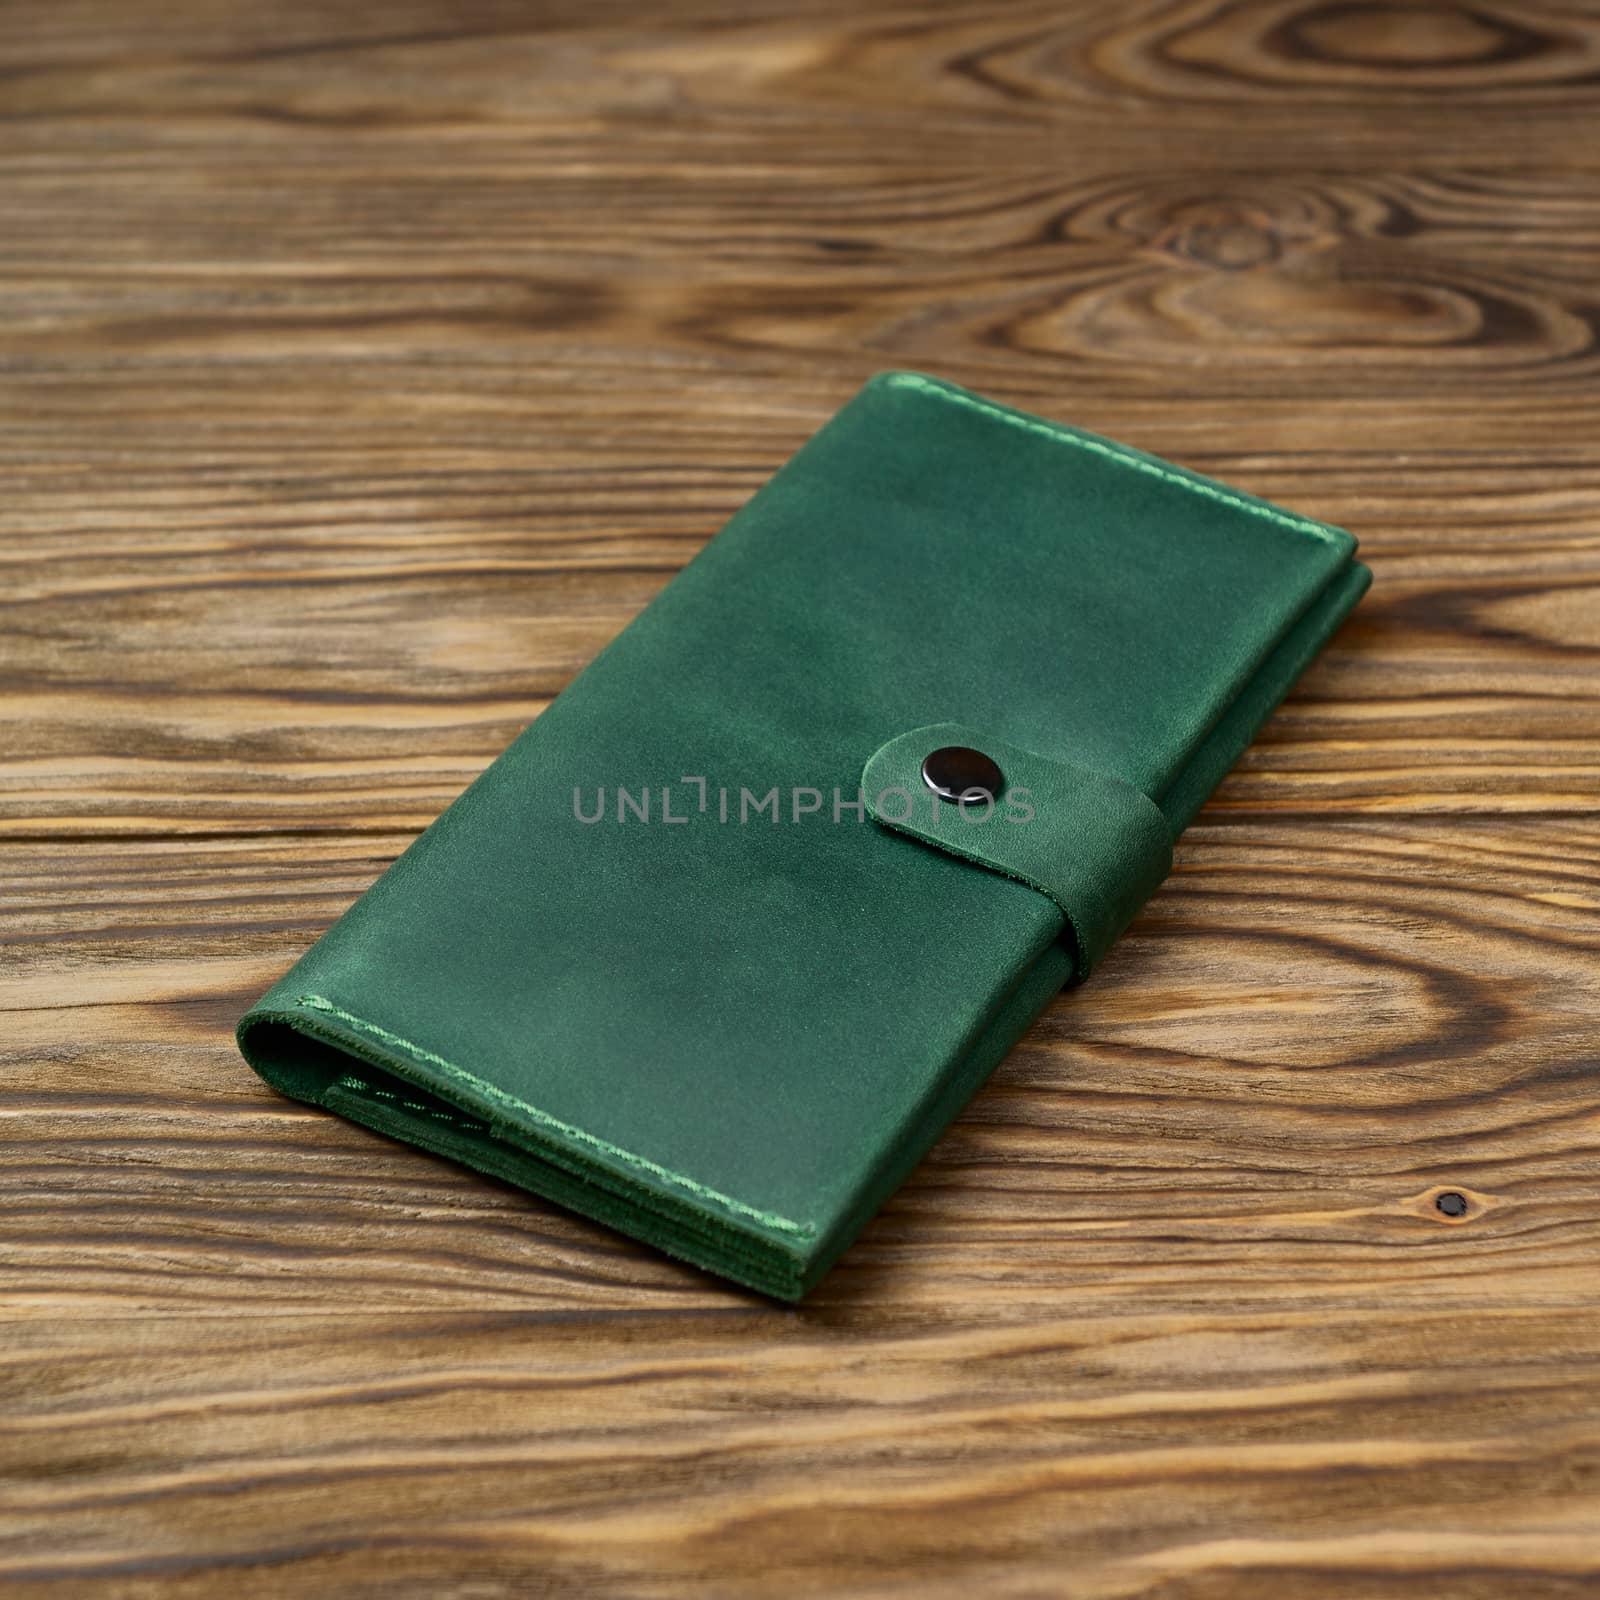 Green color handmade leather wallet on textured wooden background. Wallet is unisex. Side view. Stock photo of luxury accessories. by alexsdriver